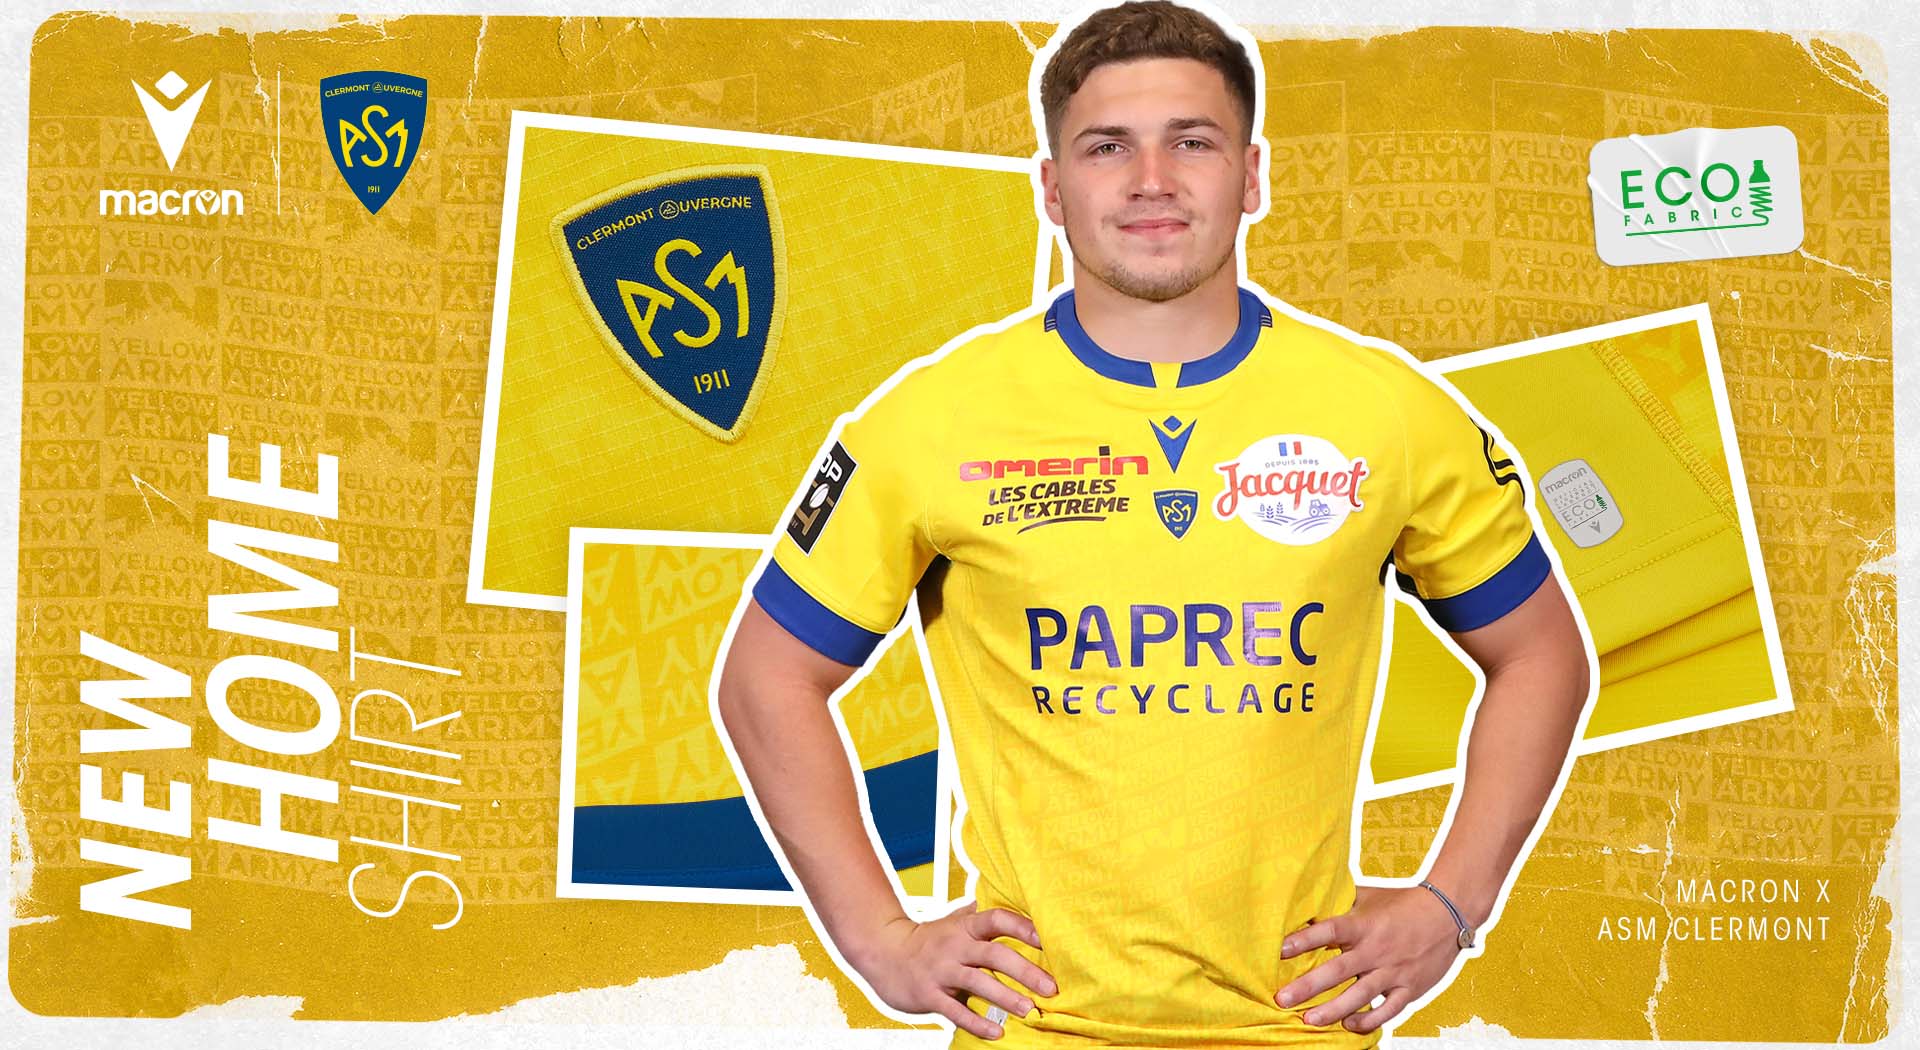 Macron ASM Clermont Auvergne and Macron announce renewal with a new Home jersey dedicated to the Yellow Army | Image 1